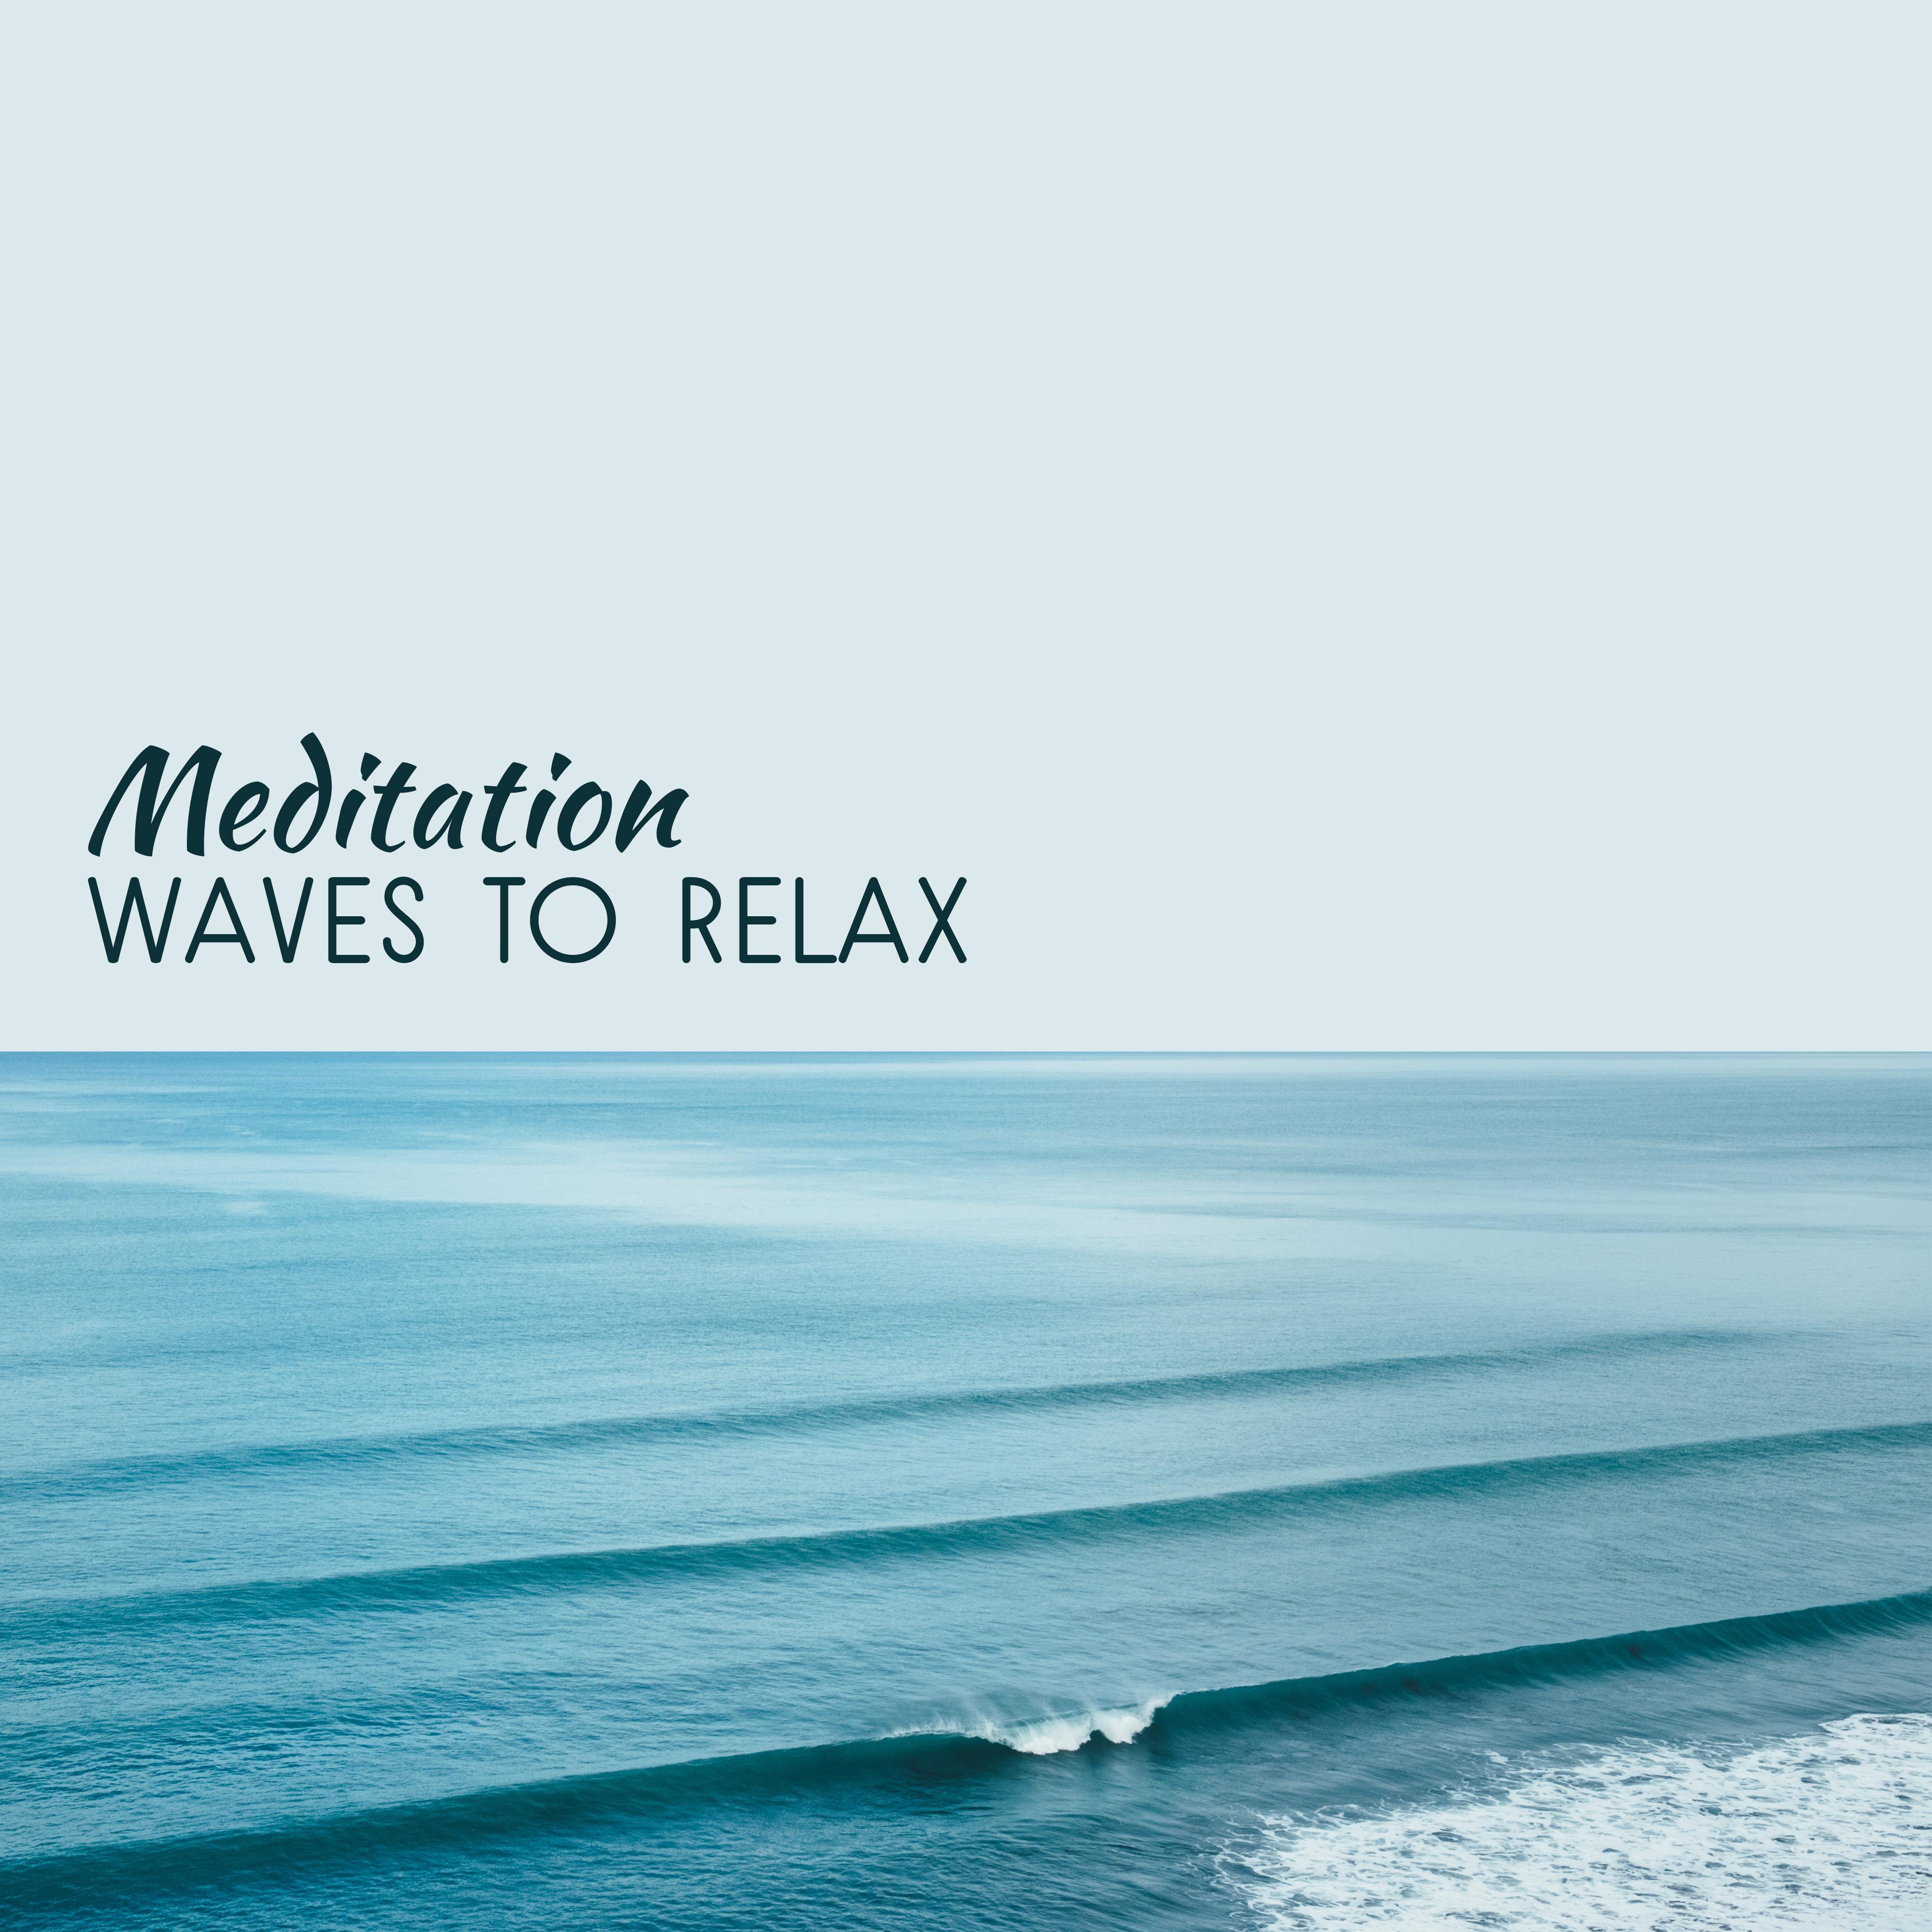 Meditation Waves to Relax